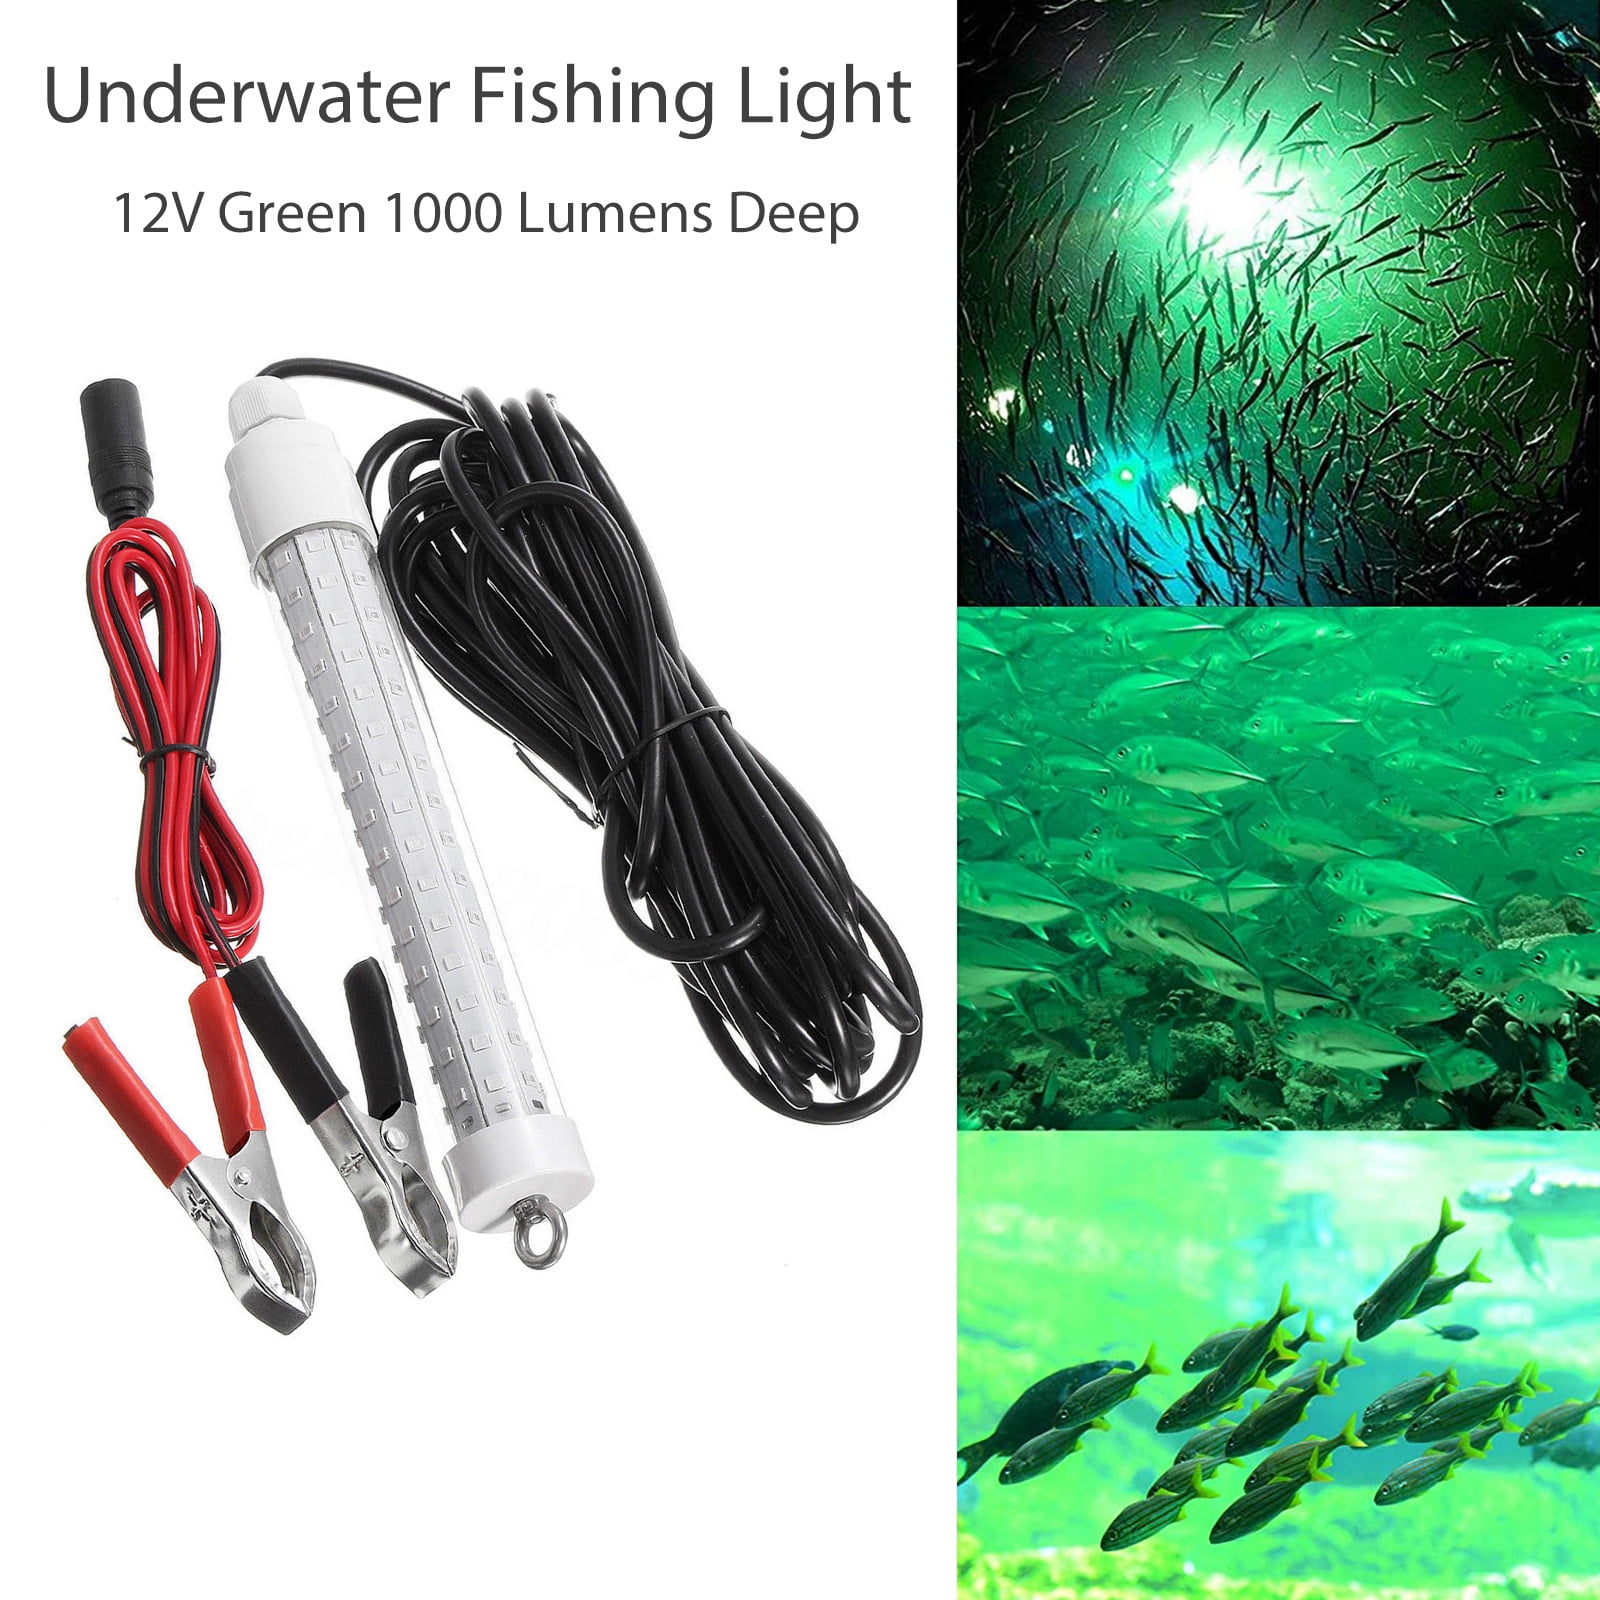 Details about   12V LED GREEN UNDERWATER SUBMERSIBLE NIGHT FISHING LIGHT crappie ice squid boat 